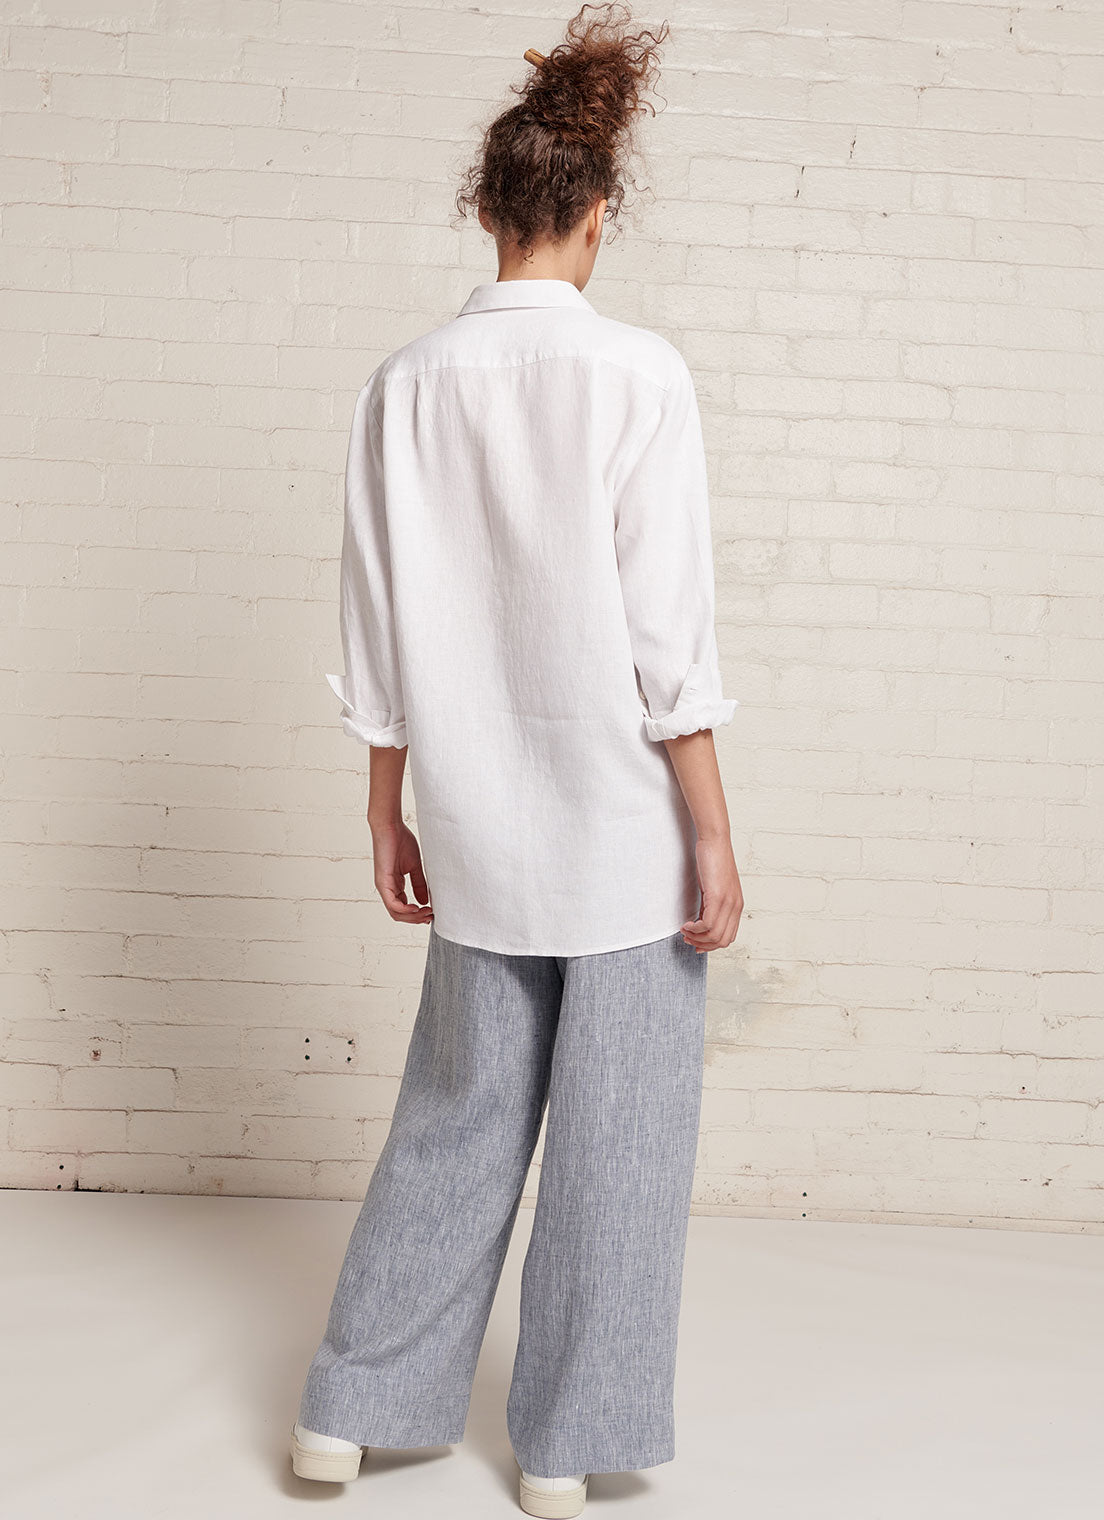 A denim, wide-leg pants with wide and elasticated back waistband and side pockets in yarn dye washed linen